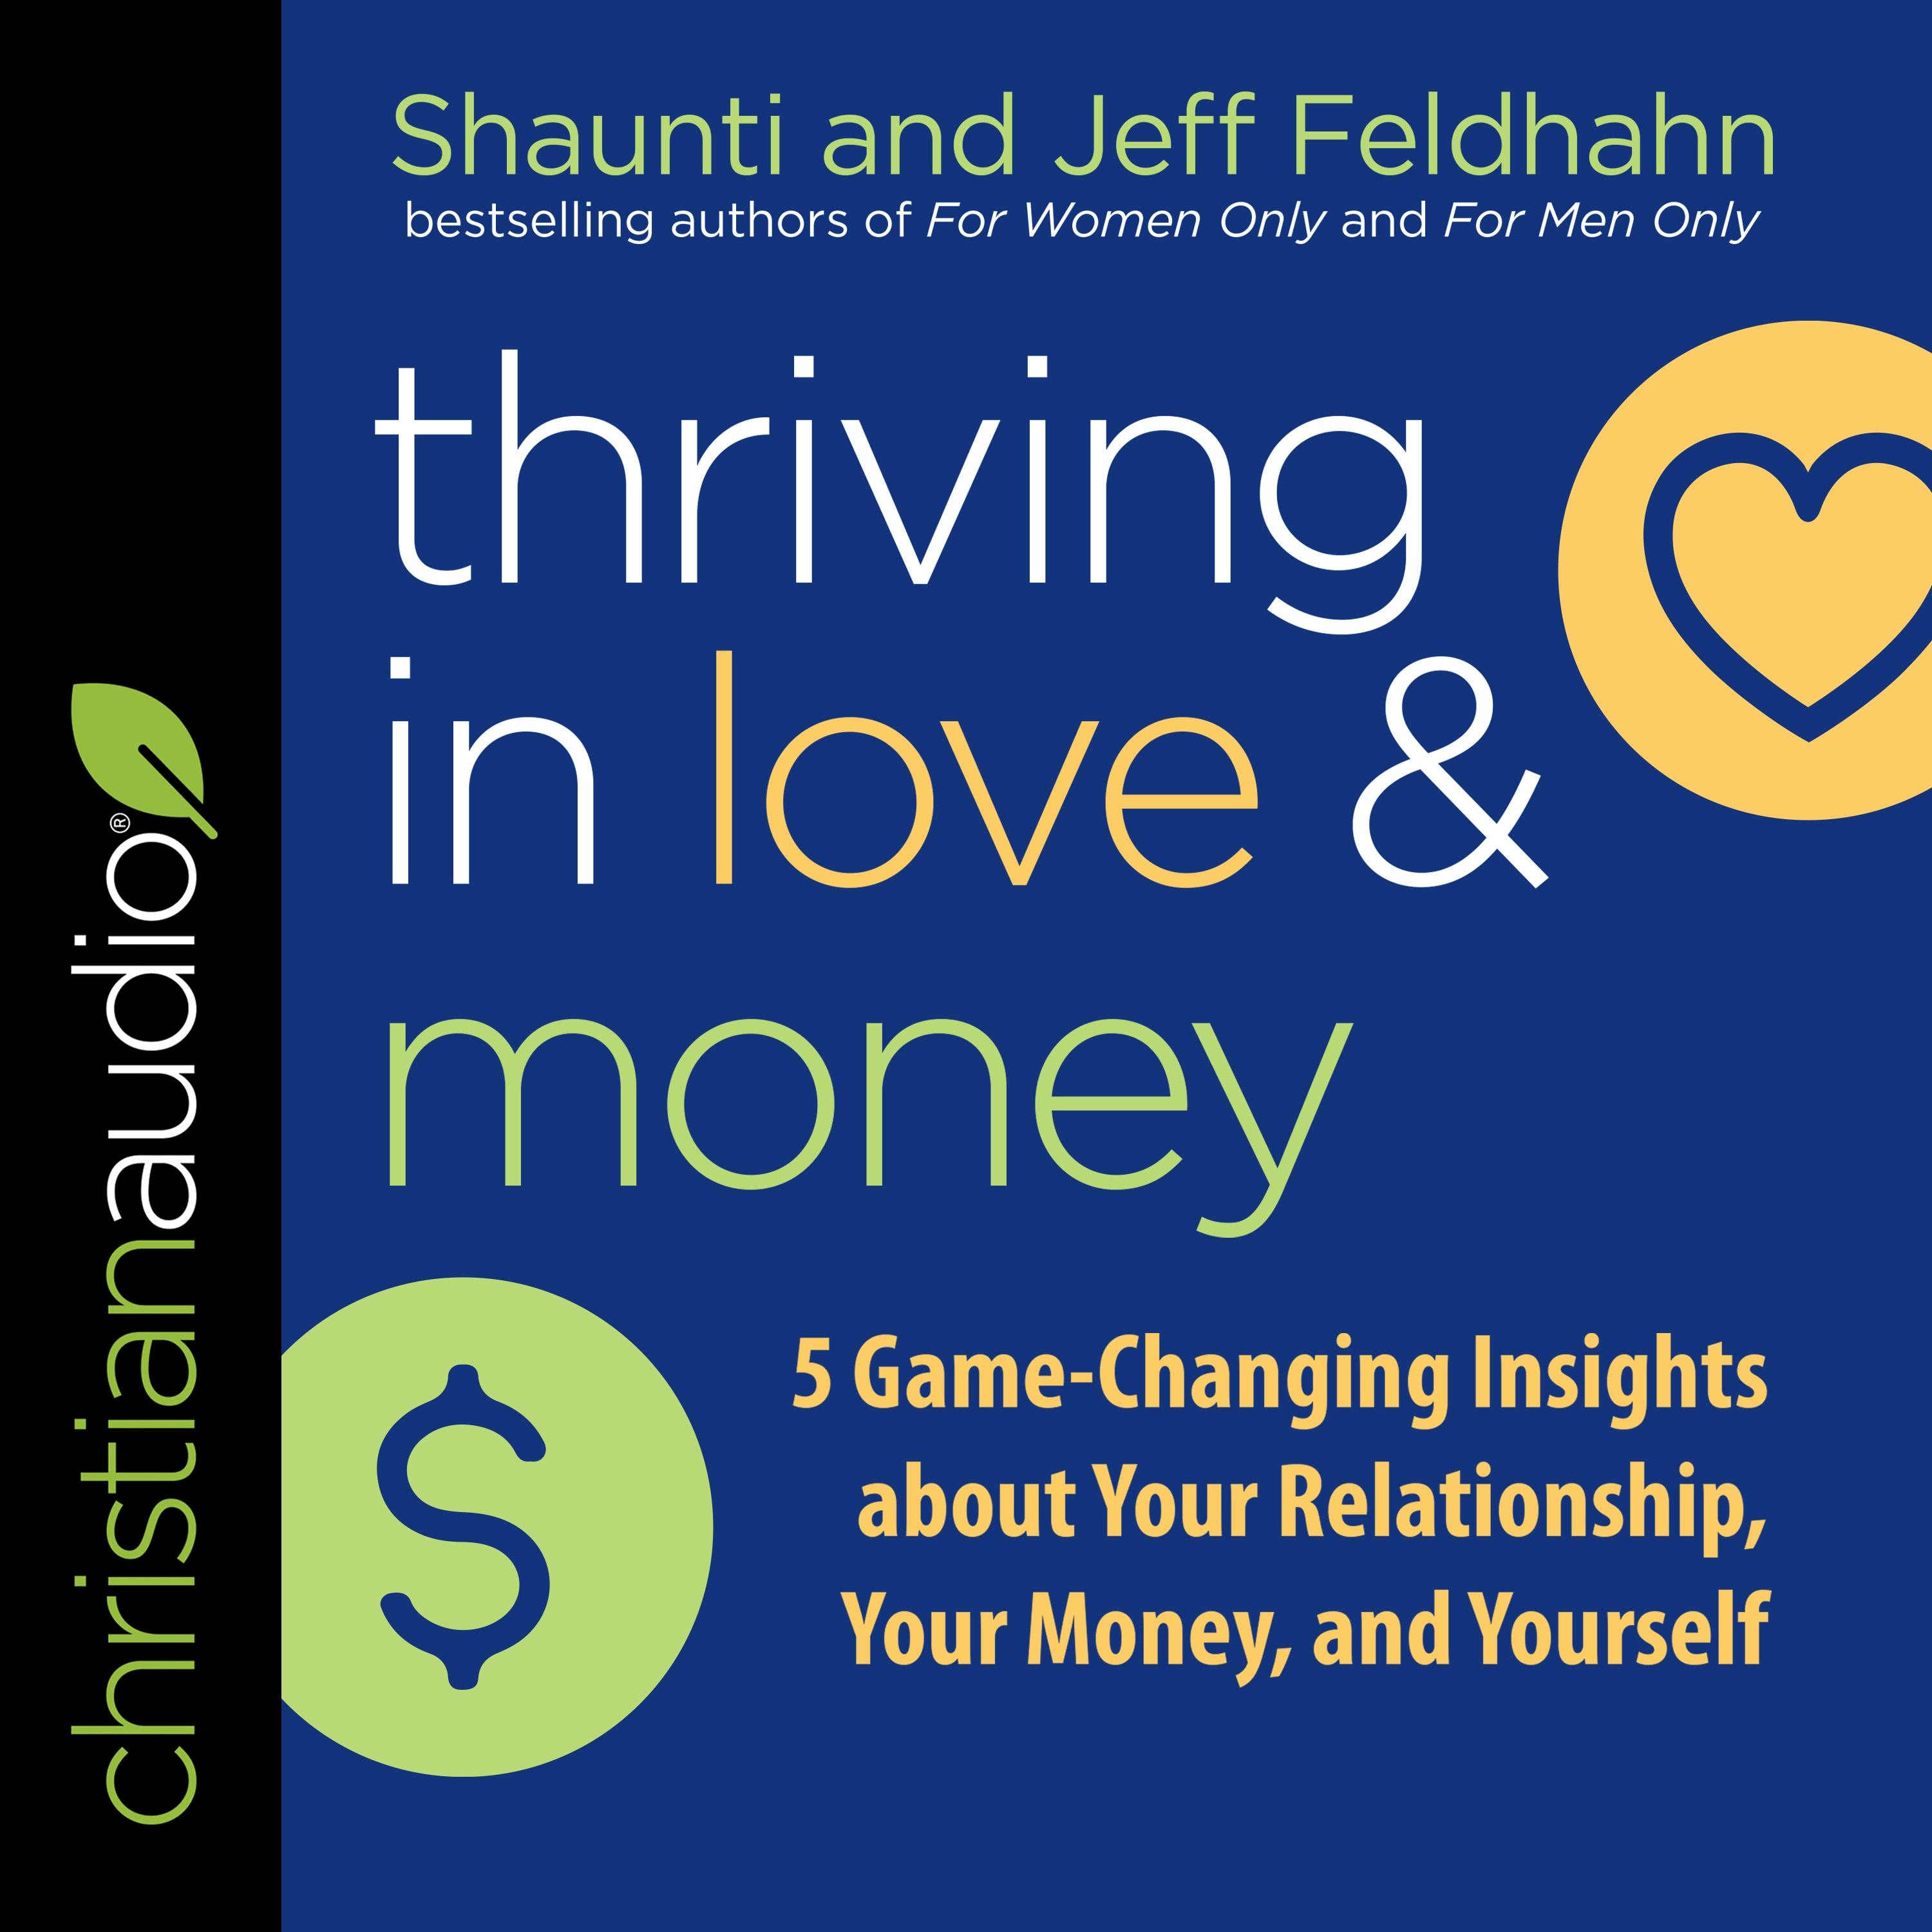 Thriving in Love and Money: 5 Game-Changing Insights about Your Relationship, Your Money, and Yourself - Jeff Feldhahn, Shaunti Feldhahn